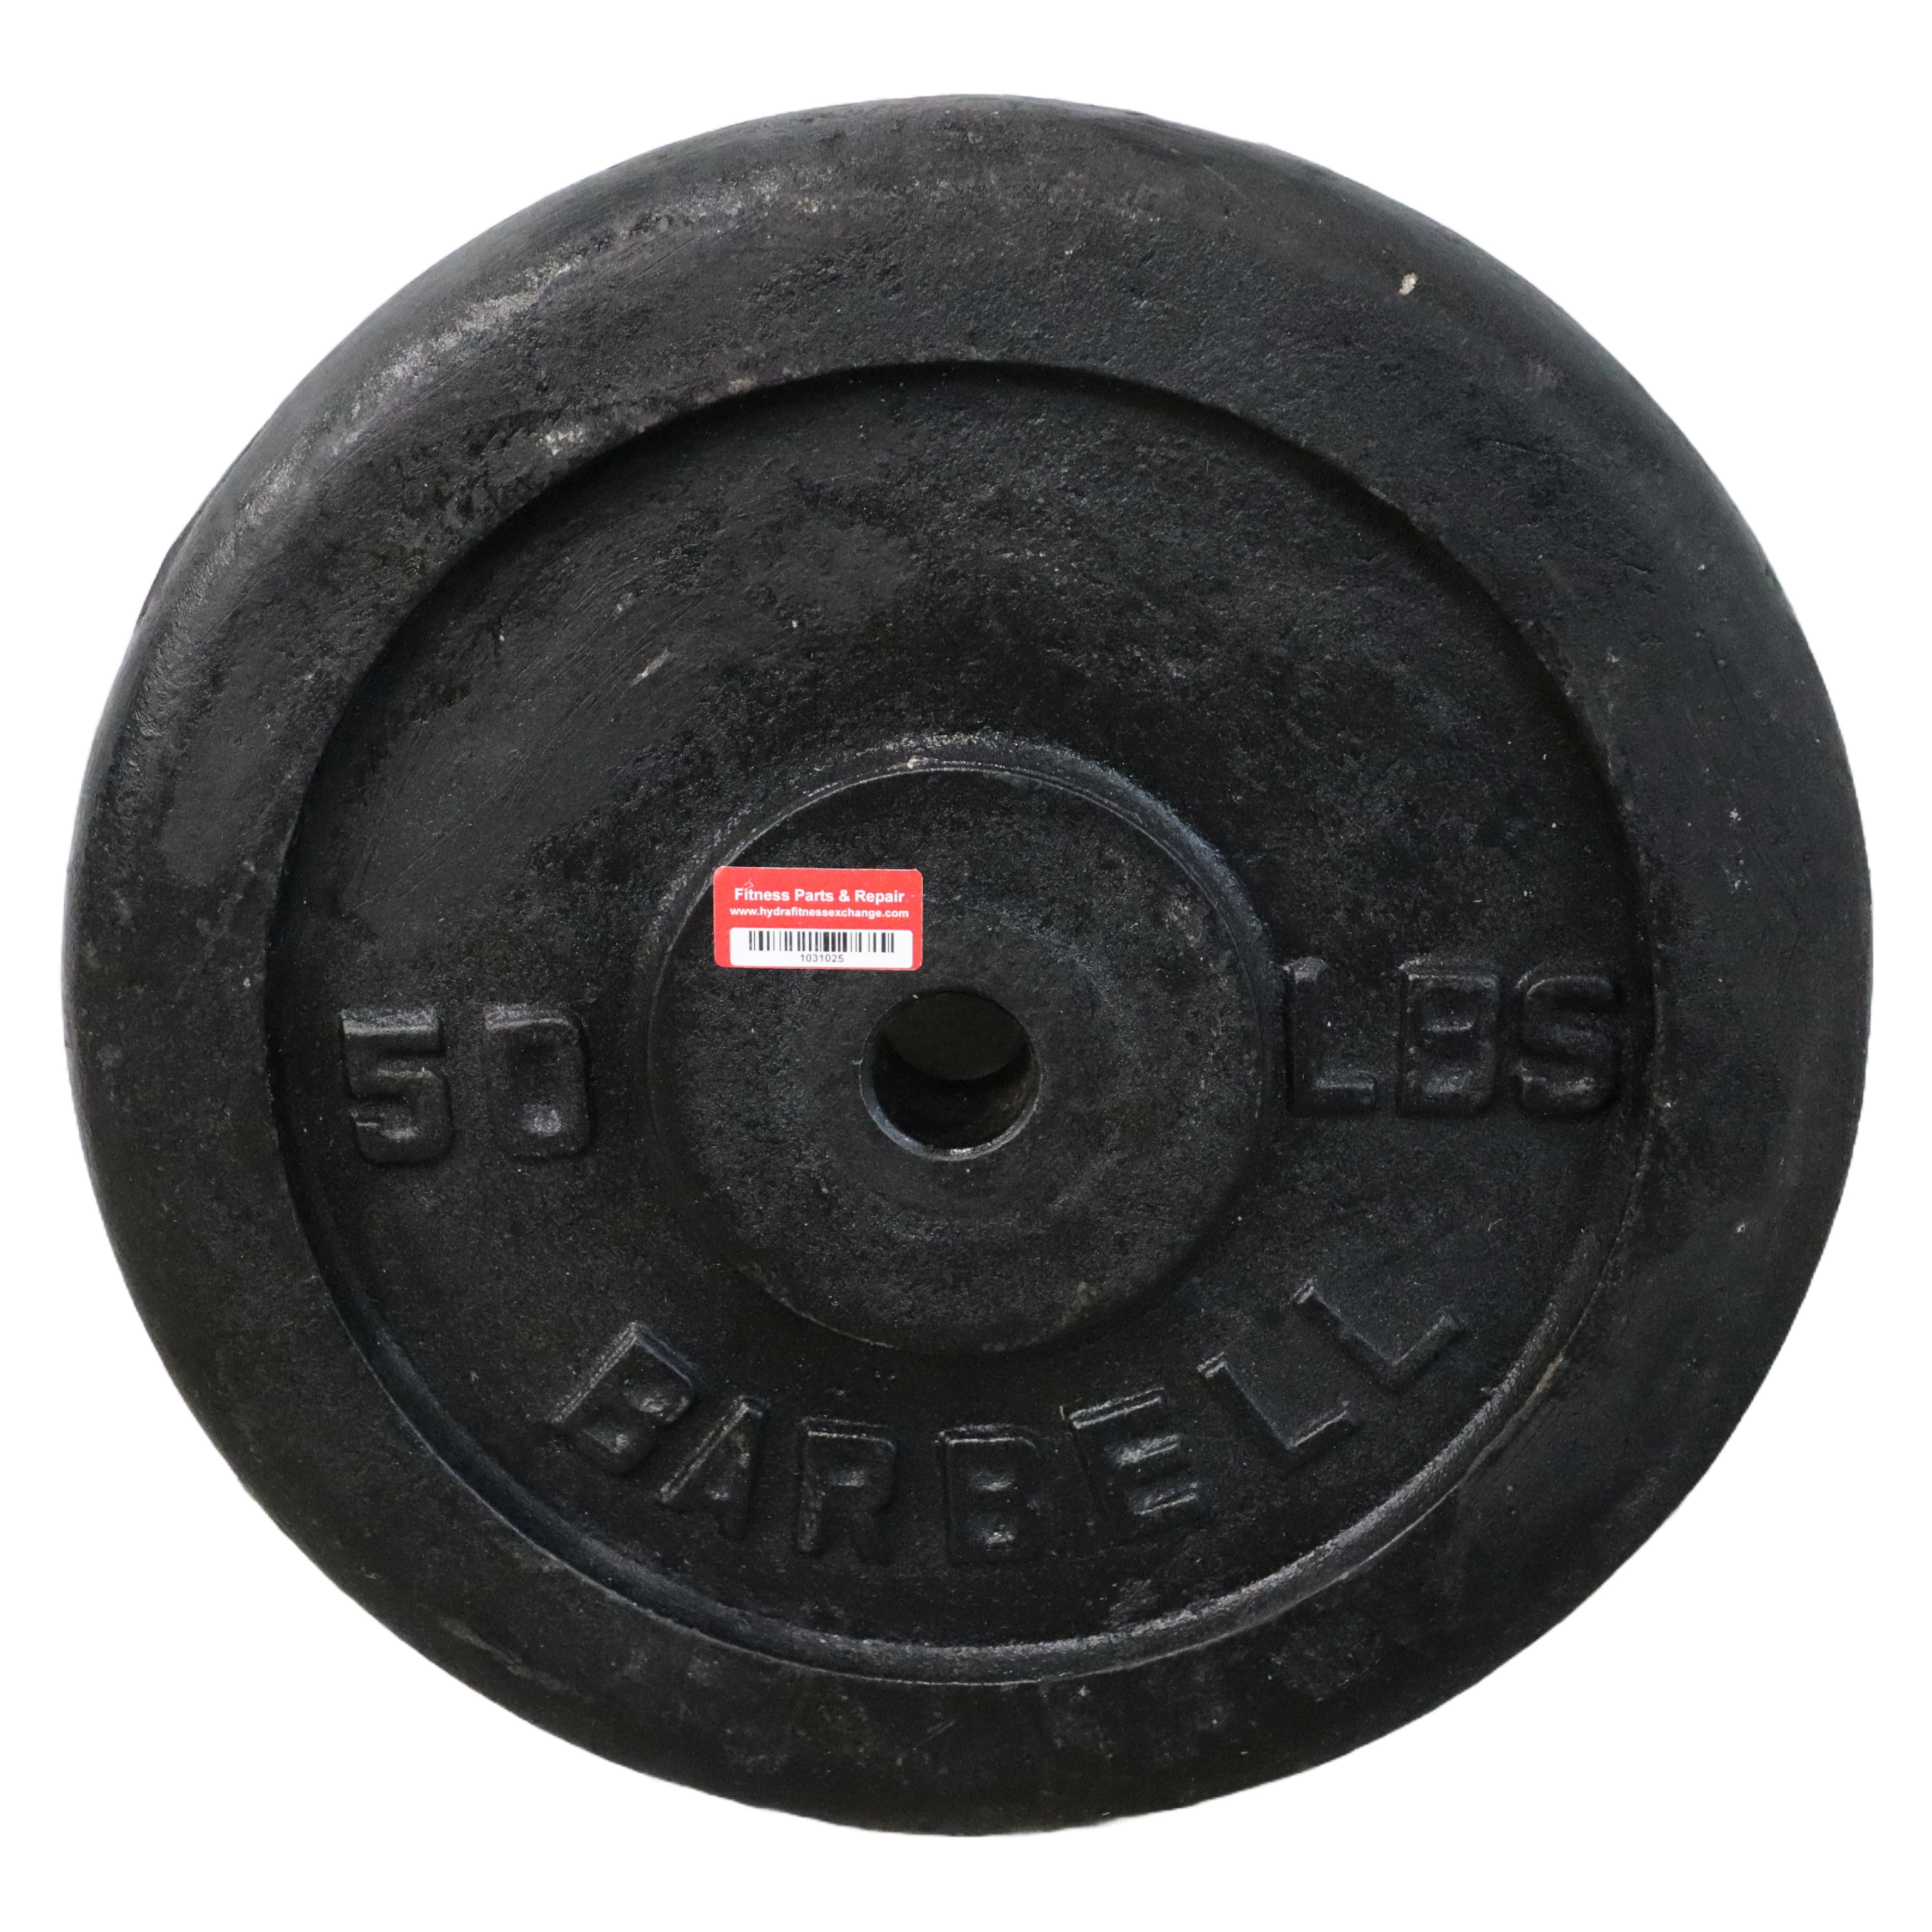 Used Misc 50lb Standard Plate Weight Freeweights & Accessories